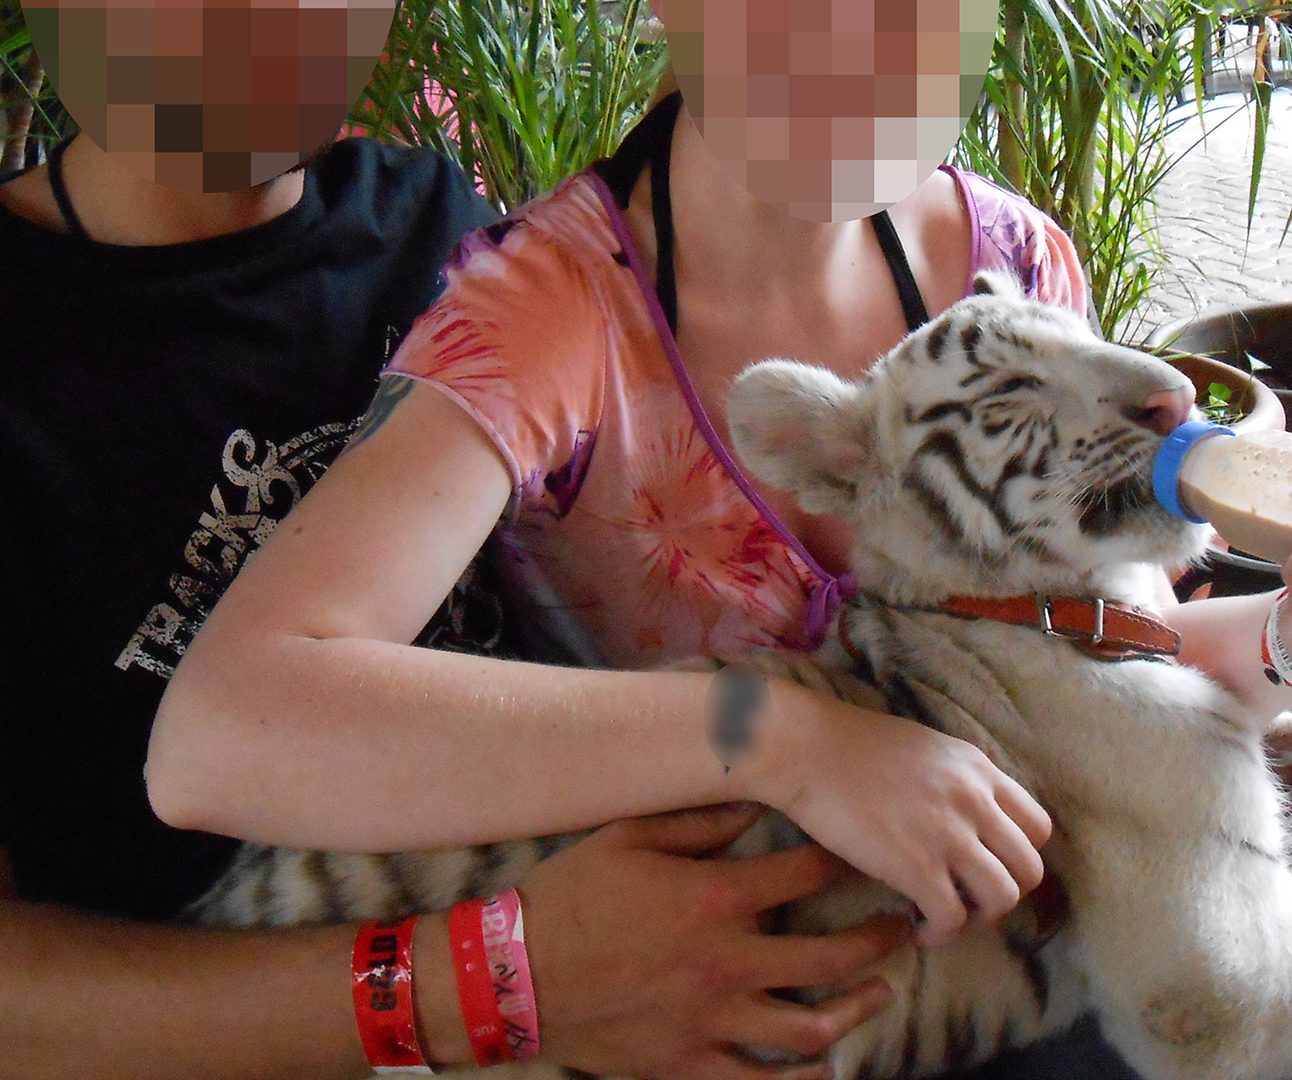 Two people holding bottle feeding a white tiger cub which is wearing a collar.